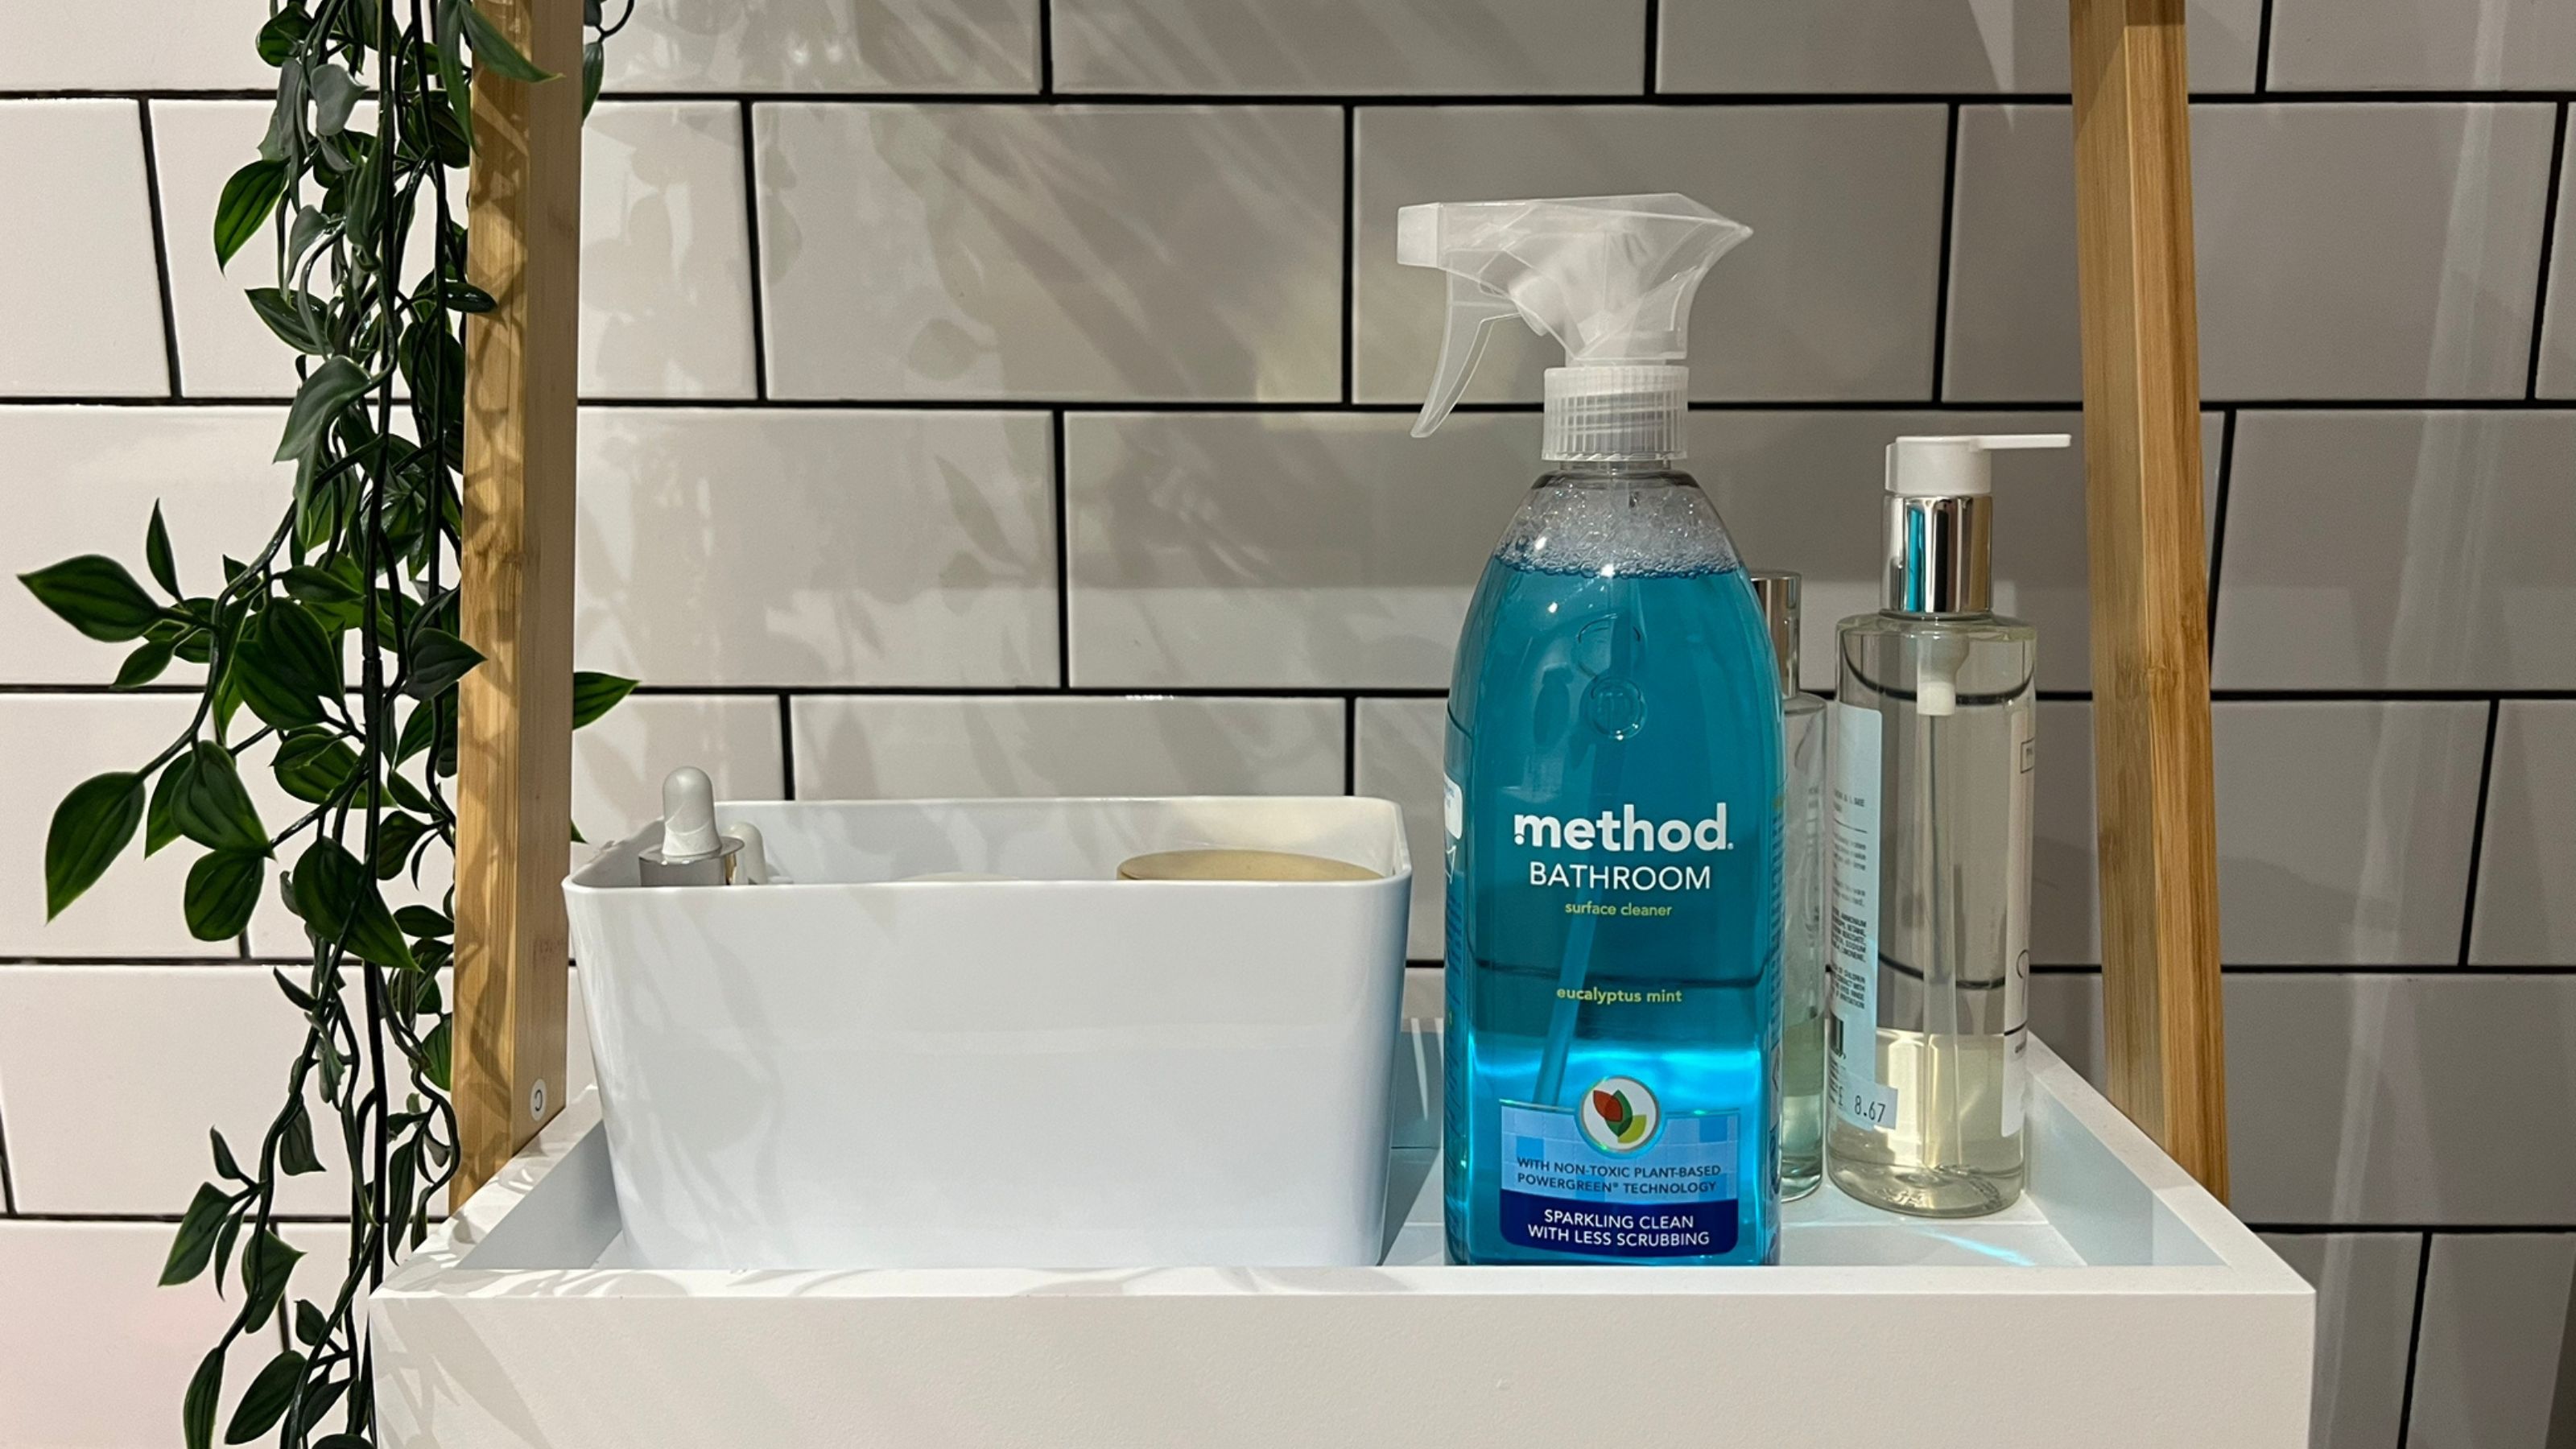 Earth Friendly Products Kitchen and Bathroom Cleaning Supplies